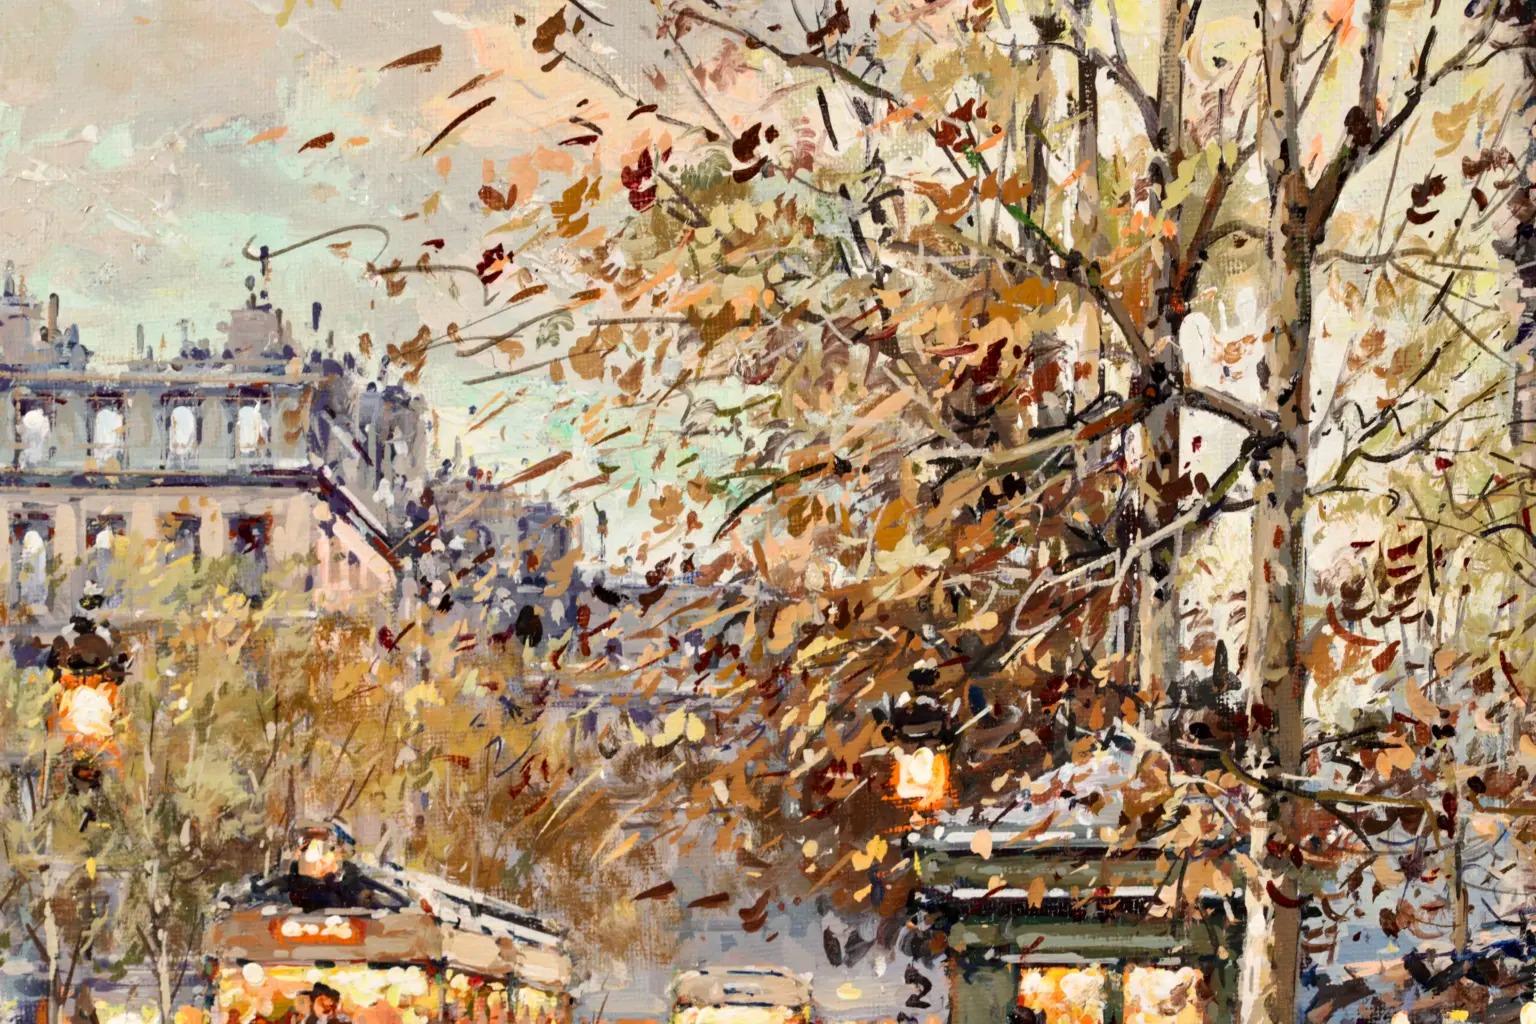 Signed post impressionist figures in cityscape oil on canvas circa 1960 by French painter Antoine Blanchard. The work depicts a bustling scene at Place de la Madeleine in Paris, France in autumn. The leaves on the trees are turning orange and brown